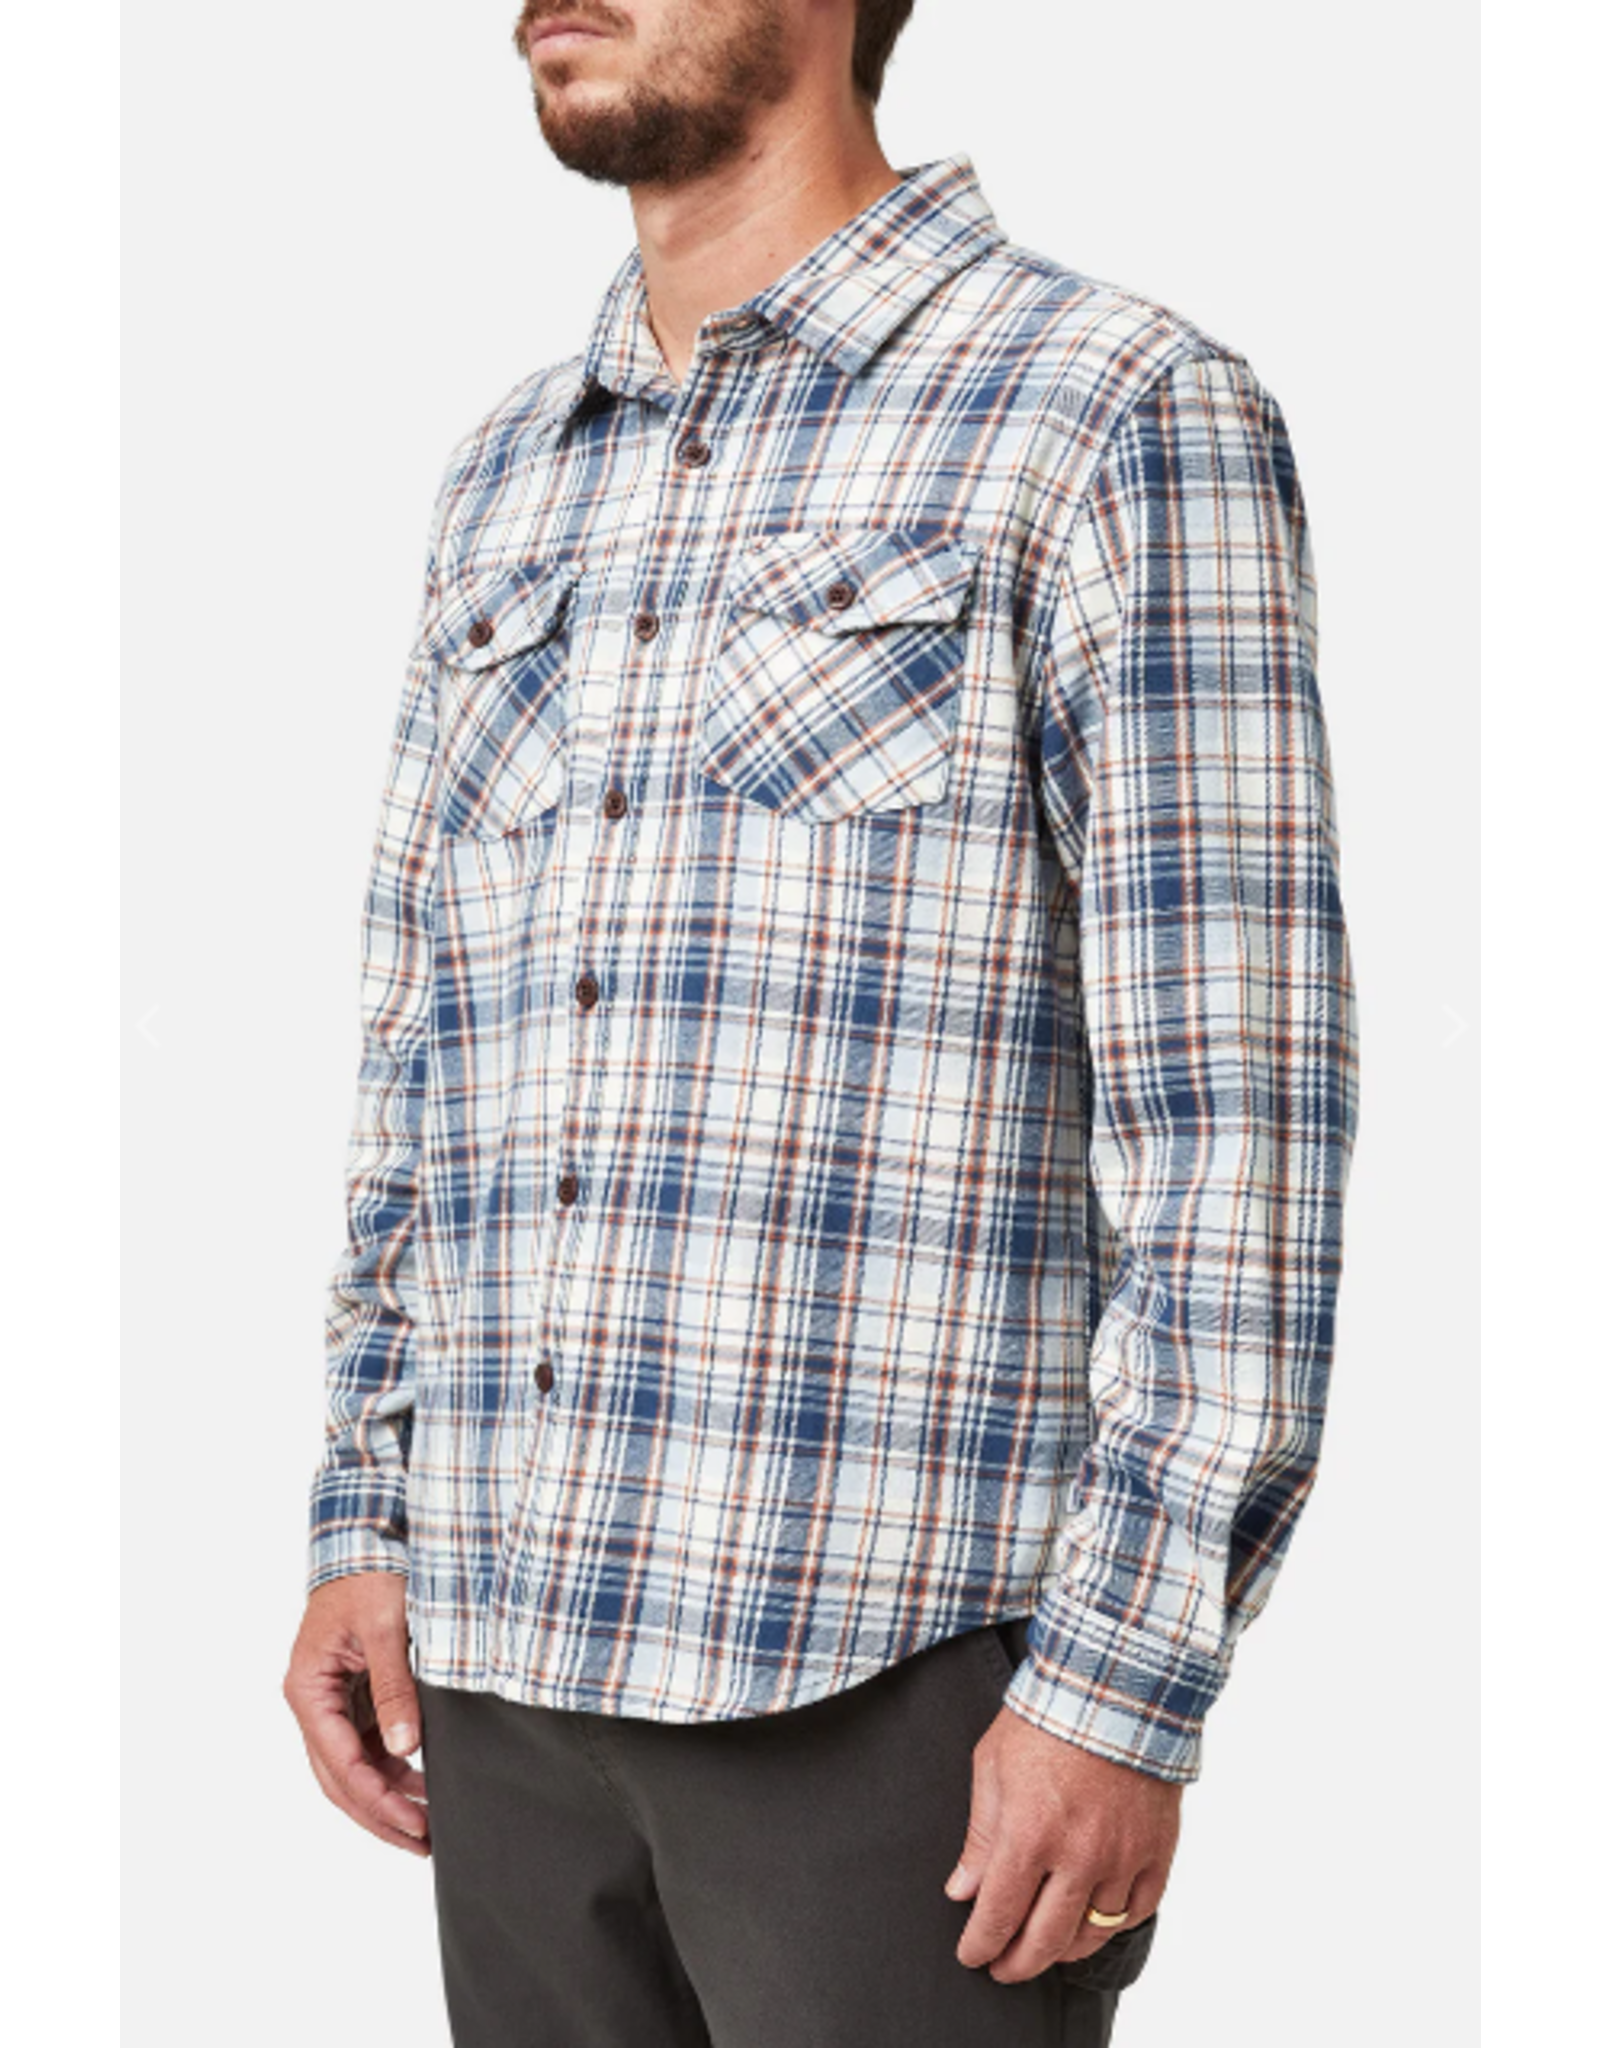 KATIN FRED FLANNEL